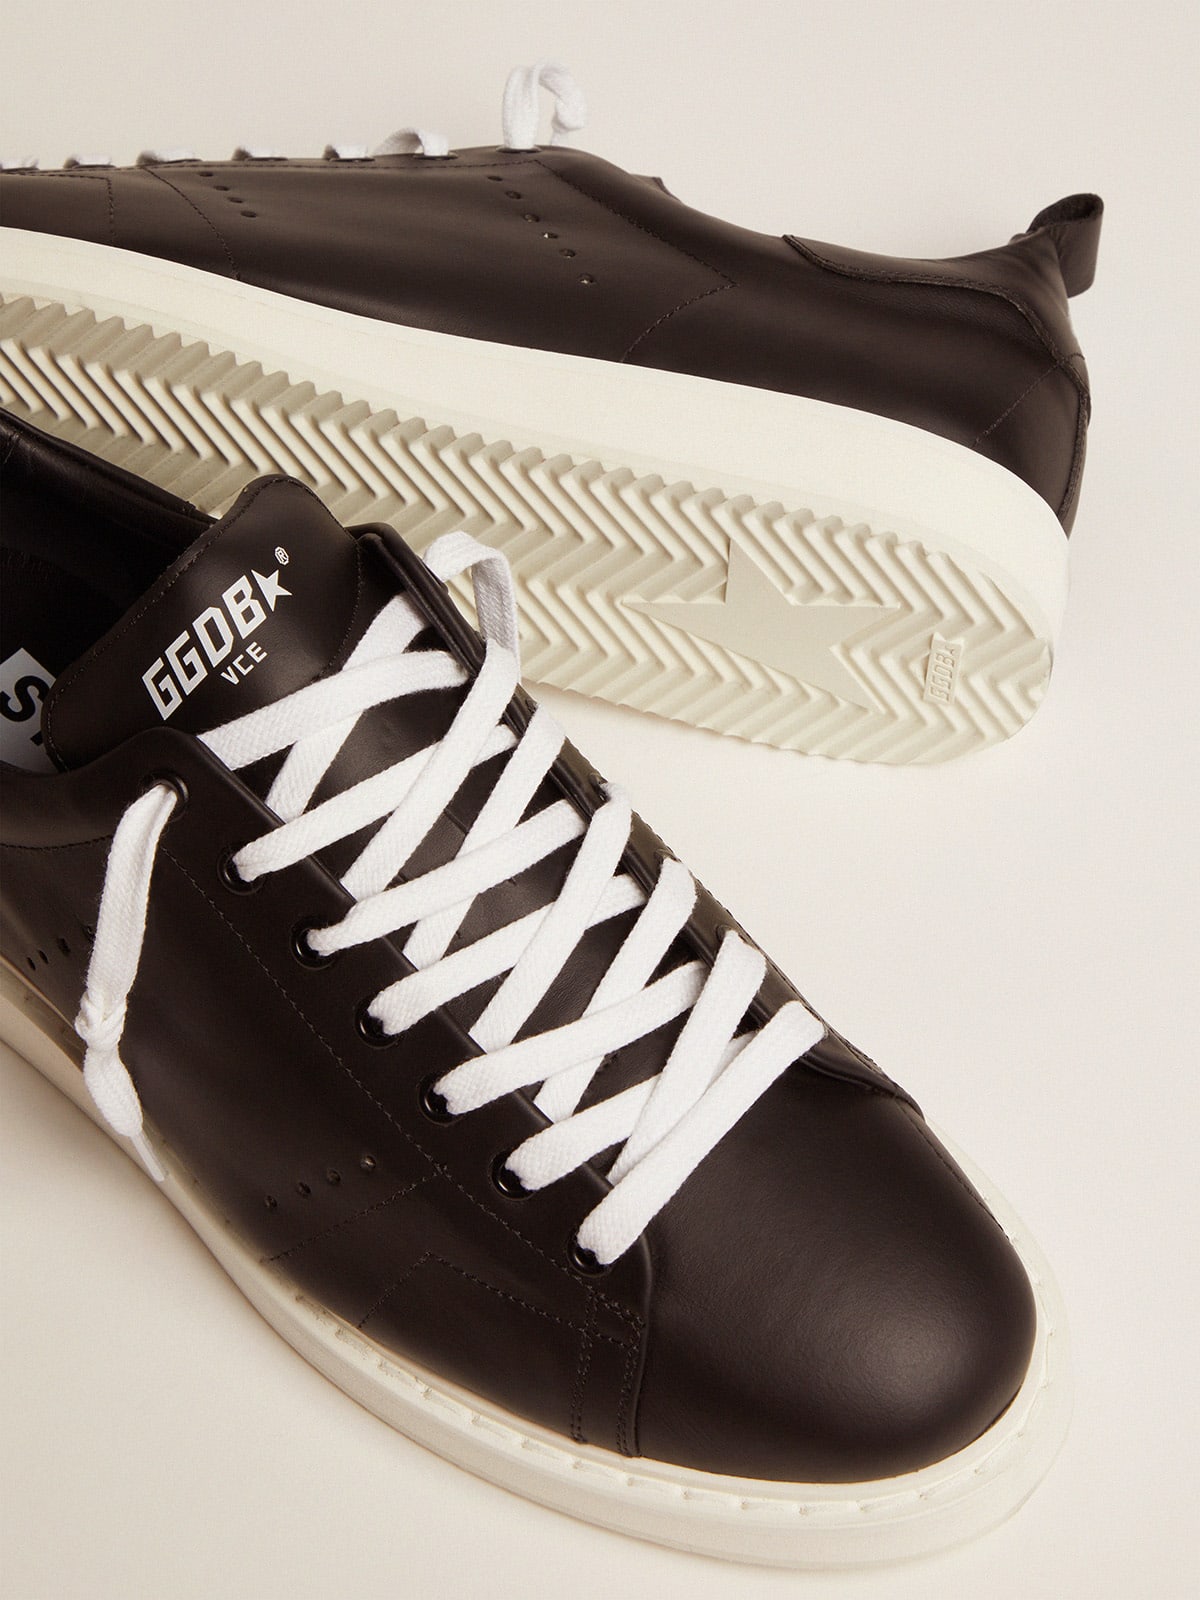 Golden Goose - Men's Starter in leather with star printed on the heel tab in 